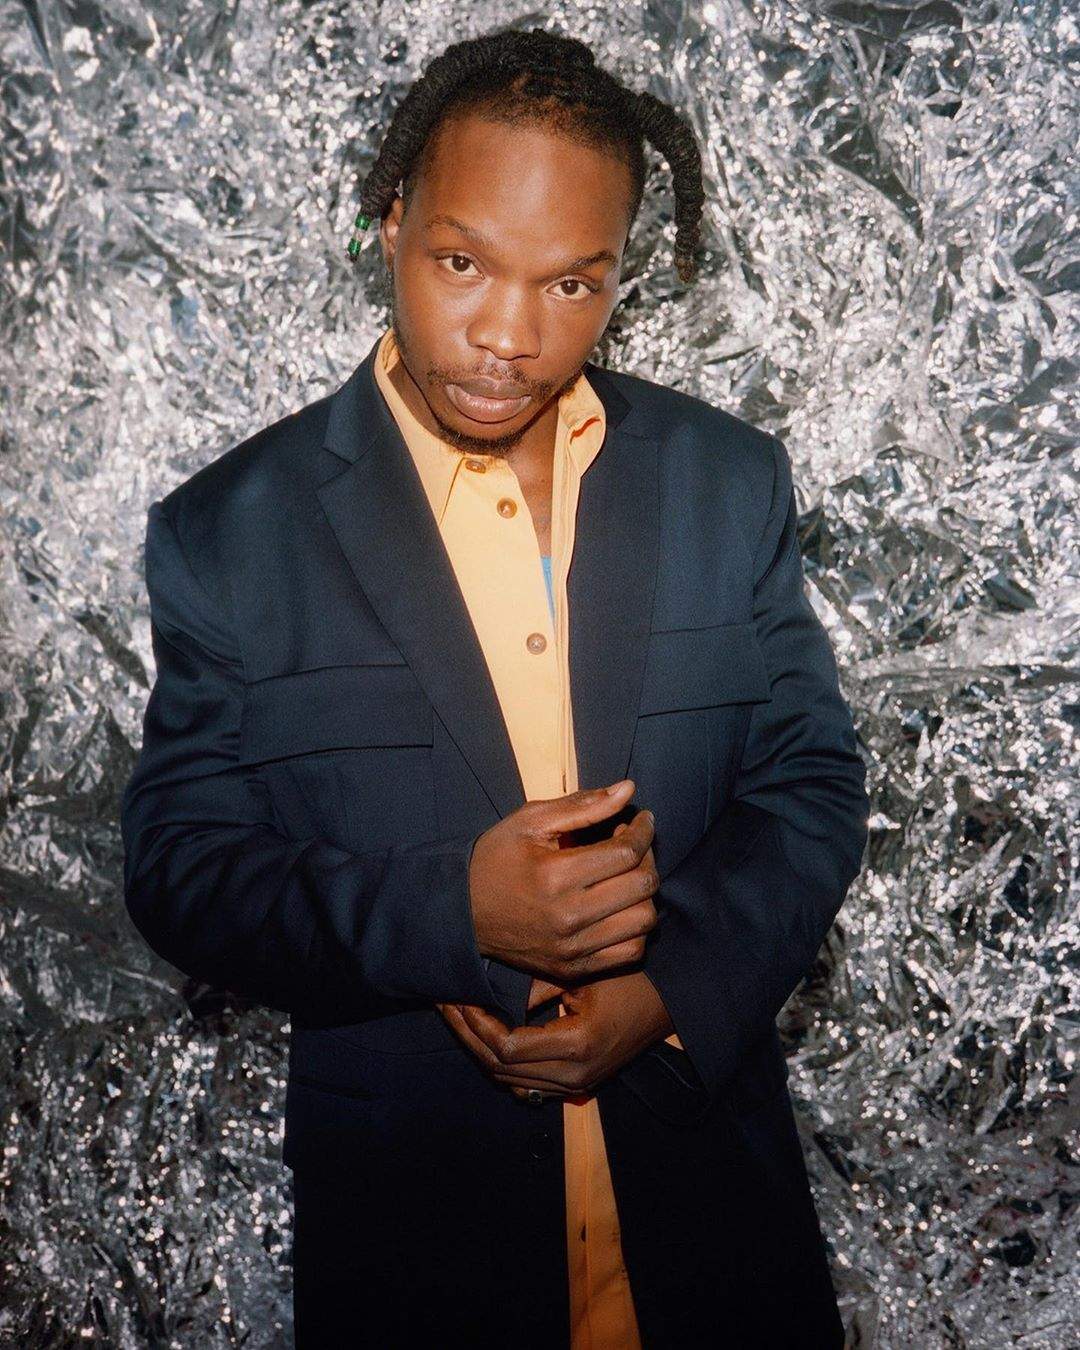 Court orders Naira Marley's arrest over car theft